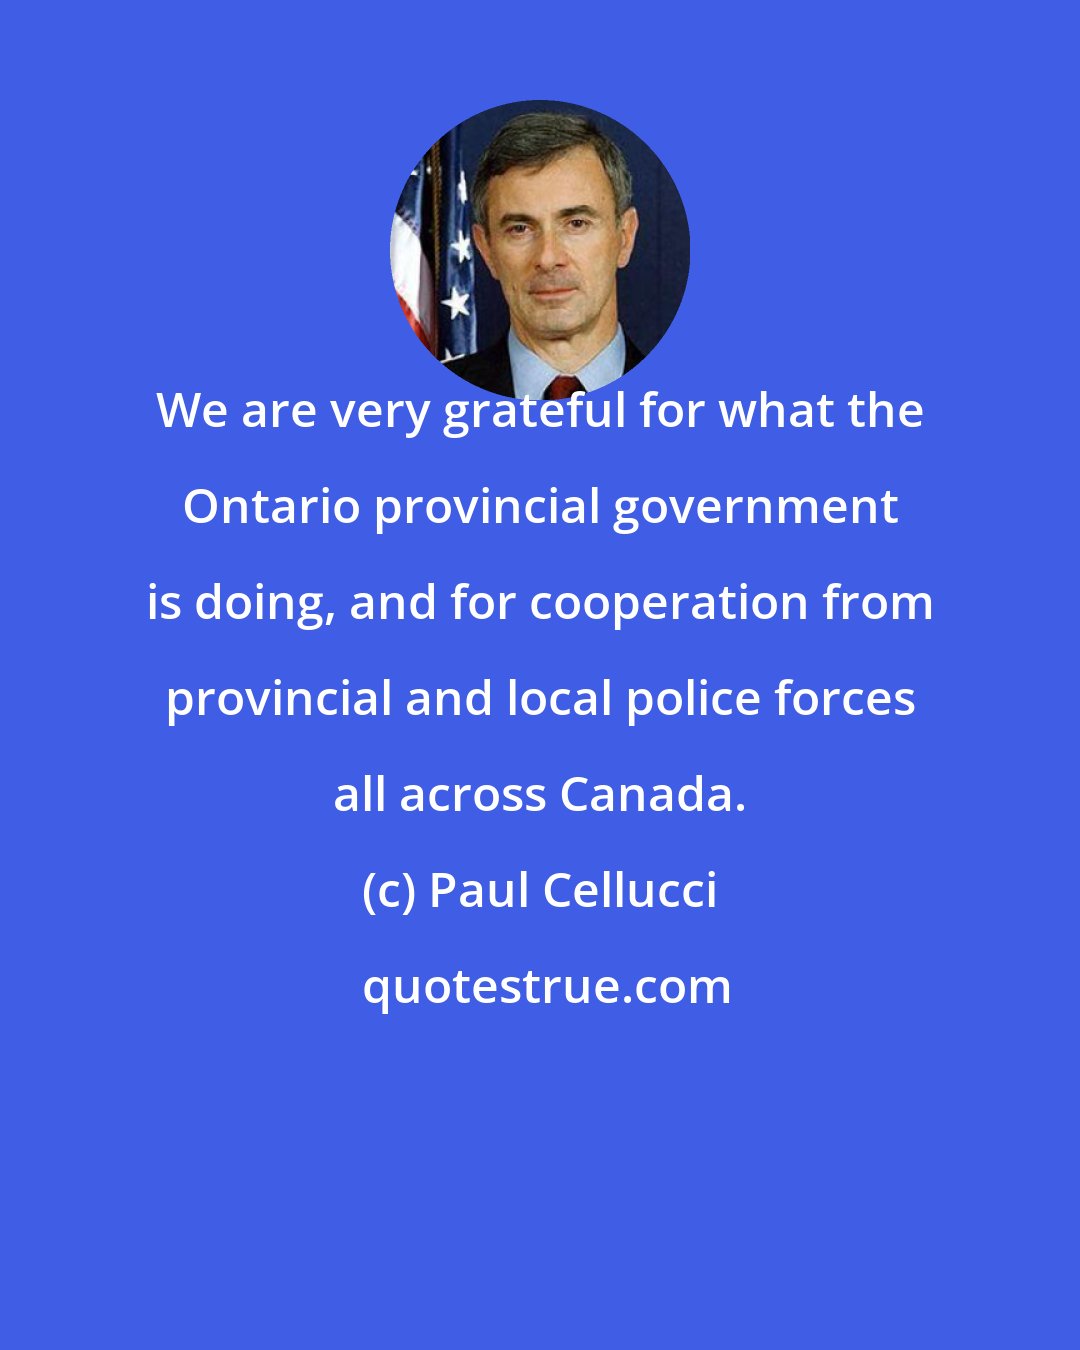 Paul Cellucci: We are very grateful for what the Ontario provincial government is doing, and for cooperation from provincial and local police forces all across Canada.